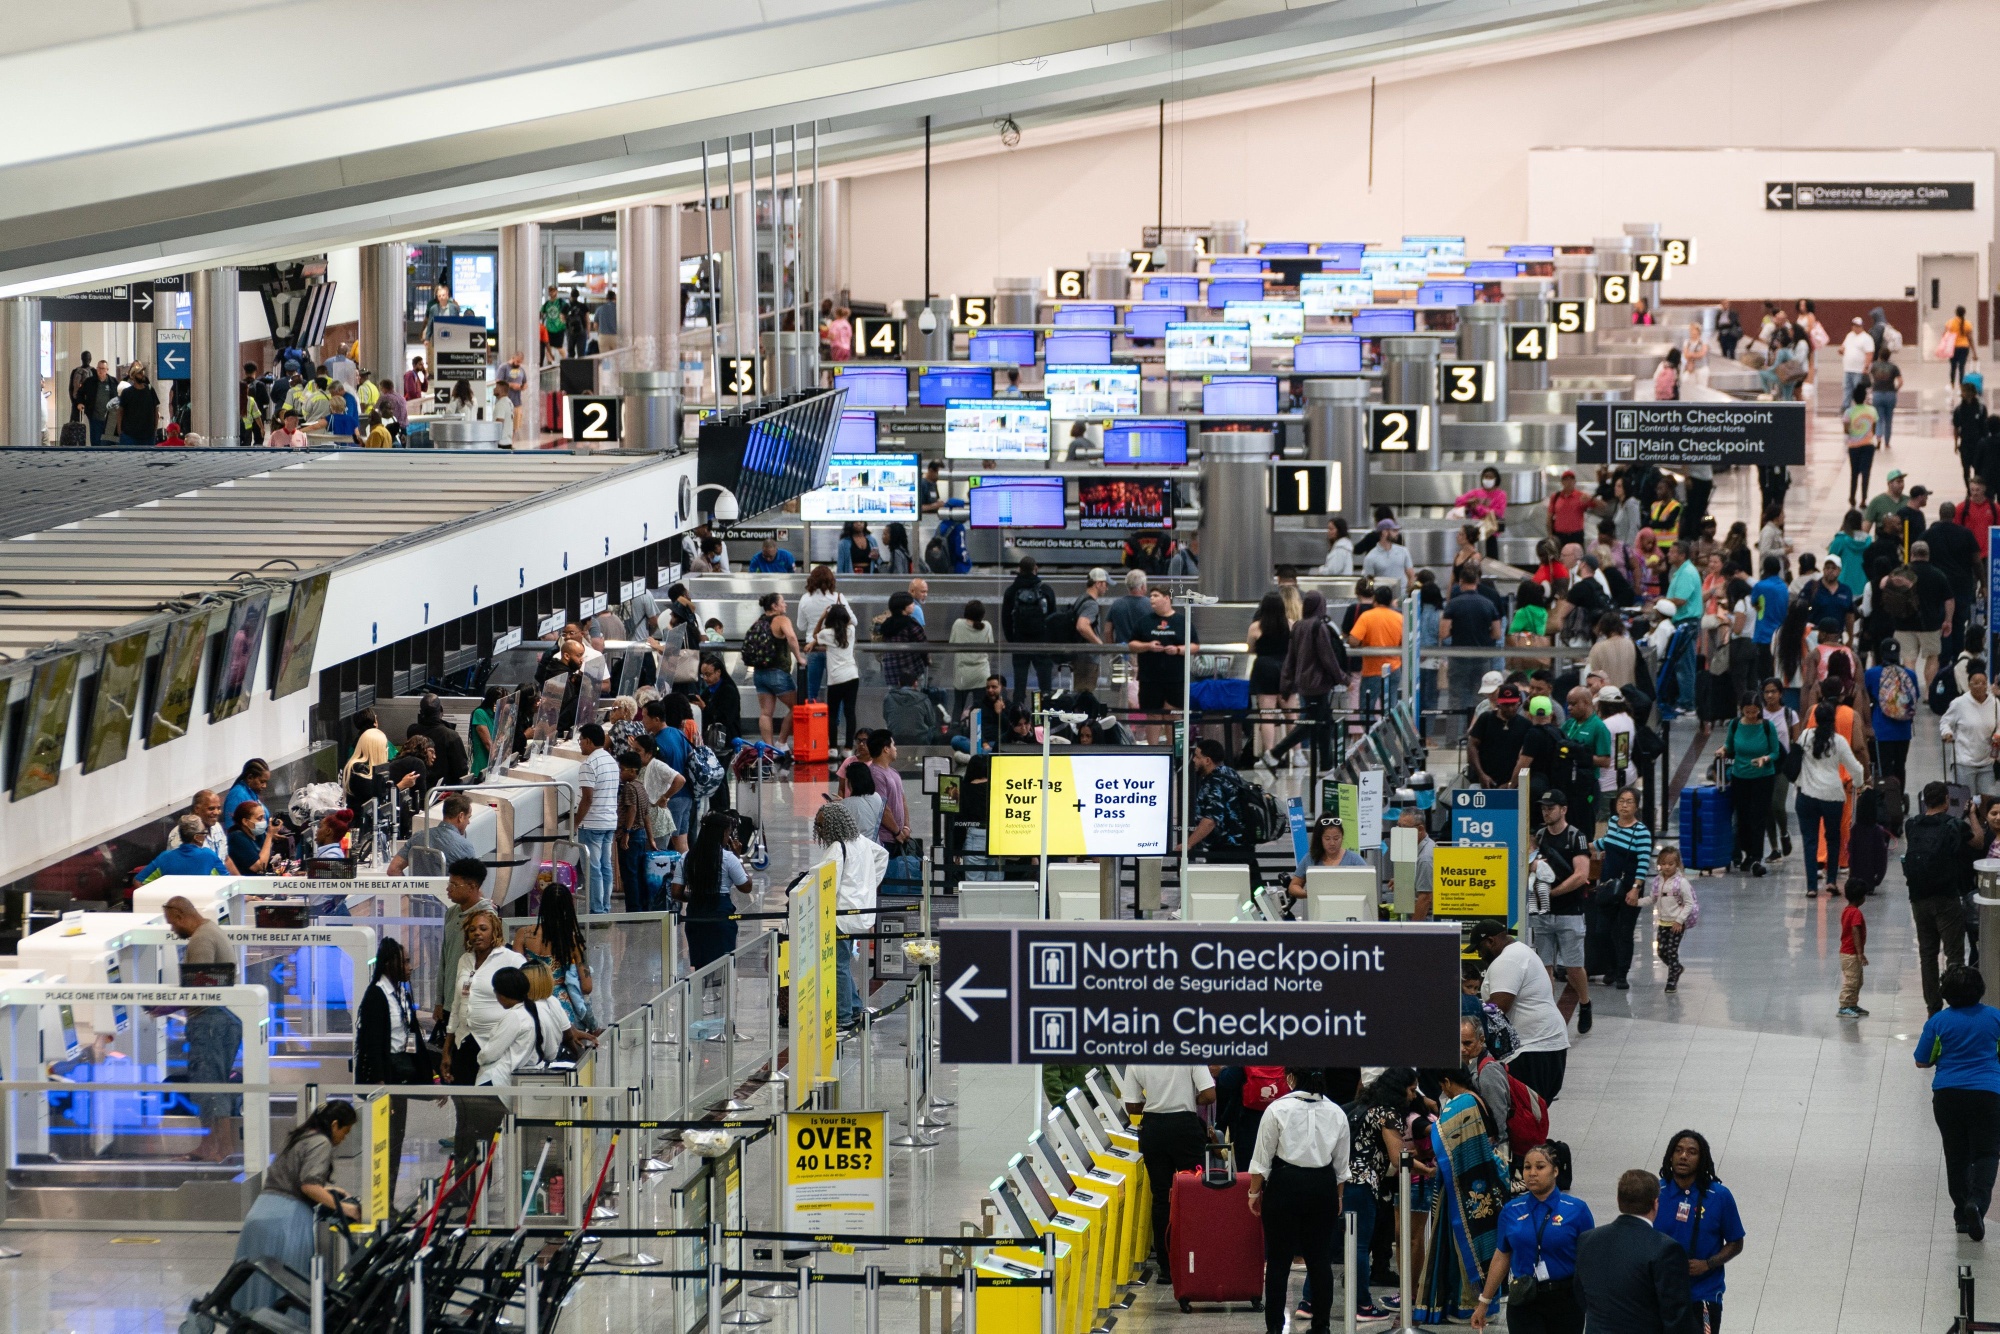 Europe's Top Airport Bracing for Potential 'Busiest Period' in 2 Years